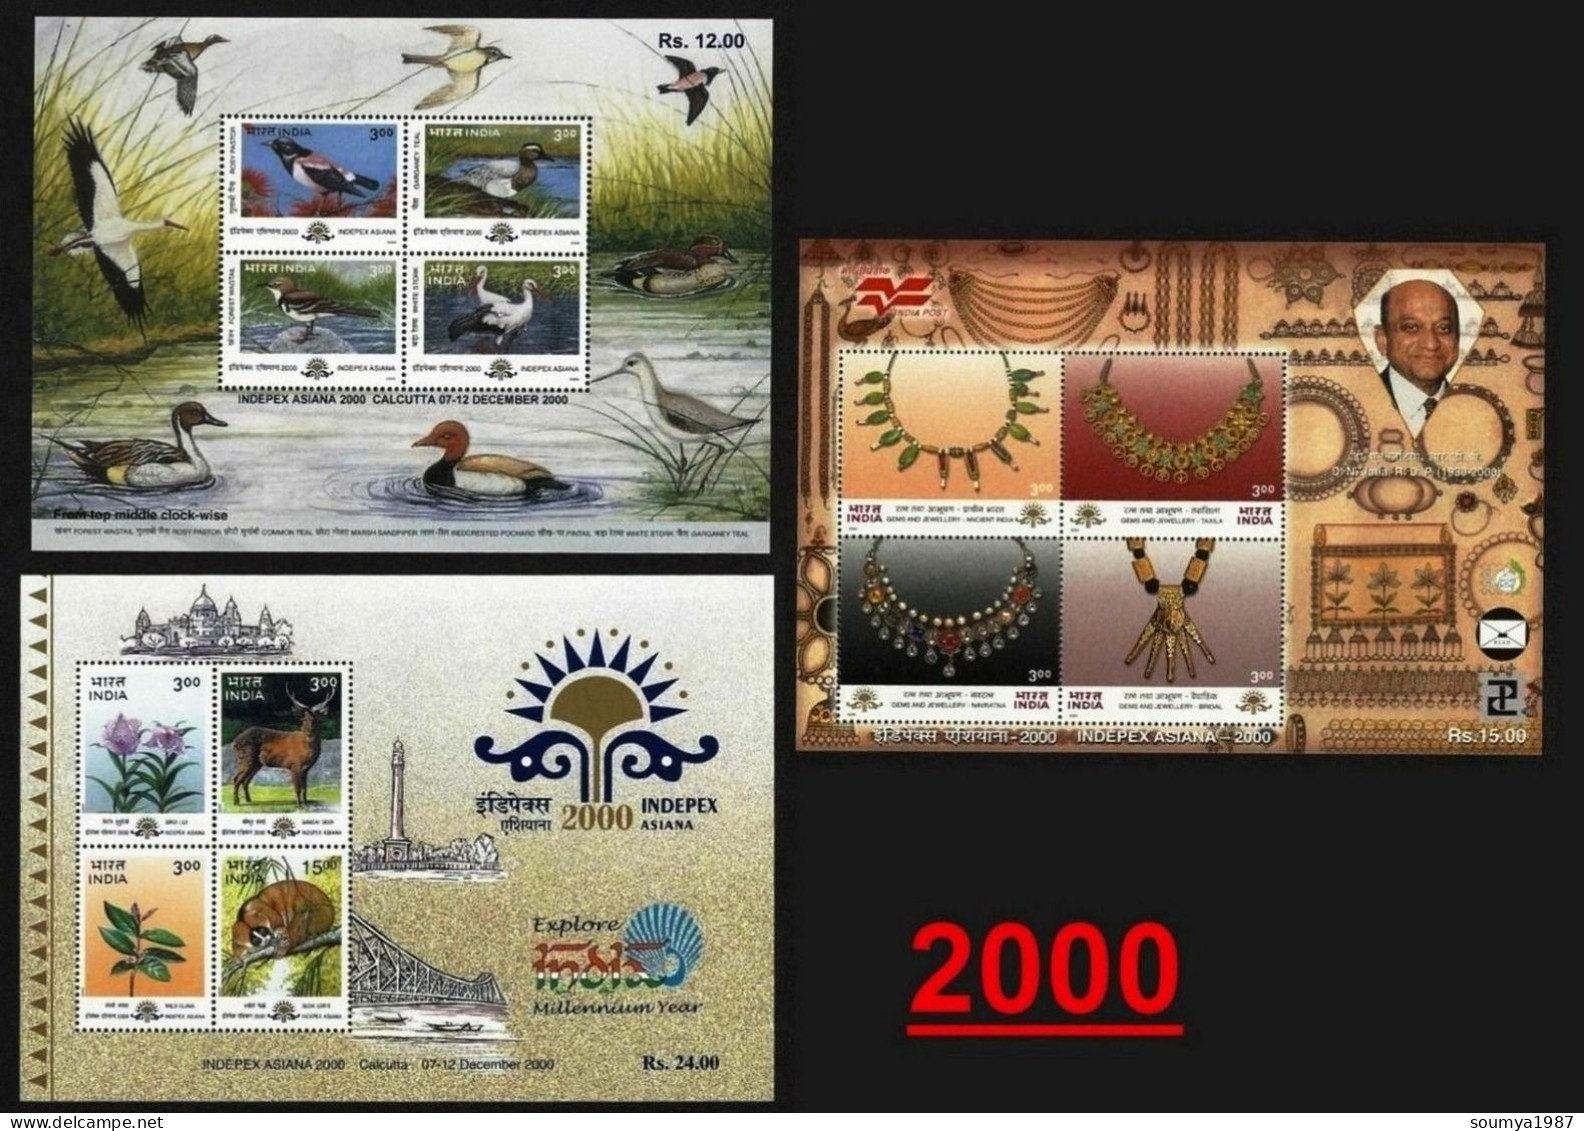 INDIA 2000 COMPLETE YEAR PACK OF MINIATURE SHEETS CONTAINS 3 MS OF FLOWERS, ANIMALS, BIRDS, JUALARY, INDIPEX MS MNH - Nuovi